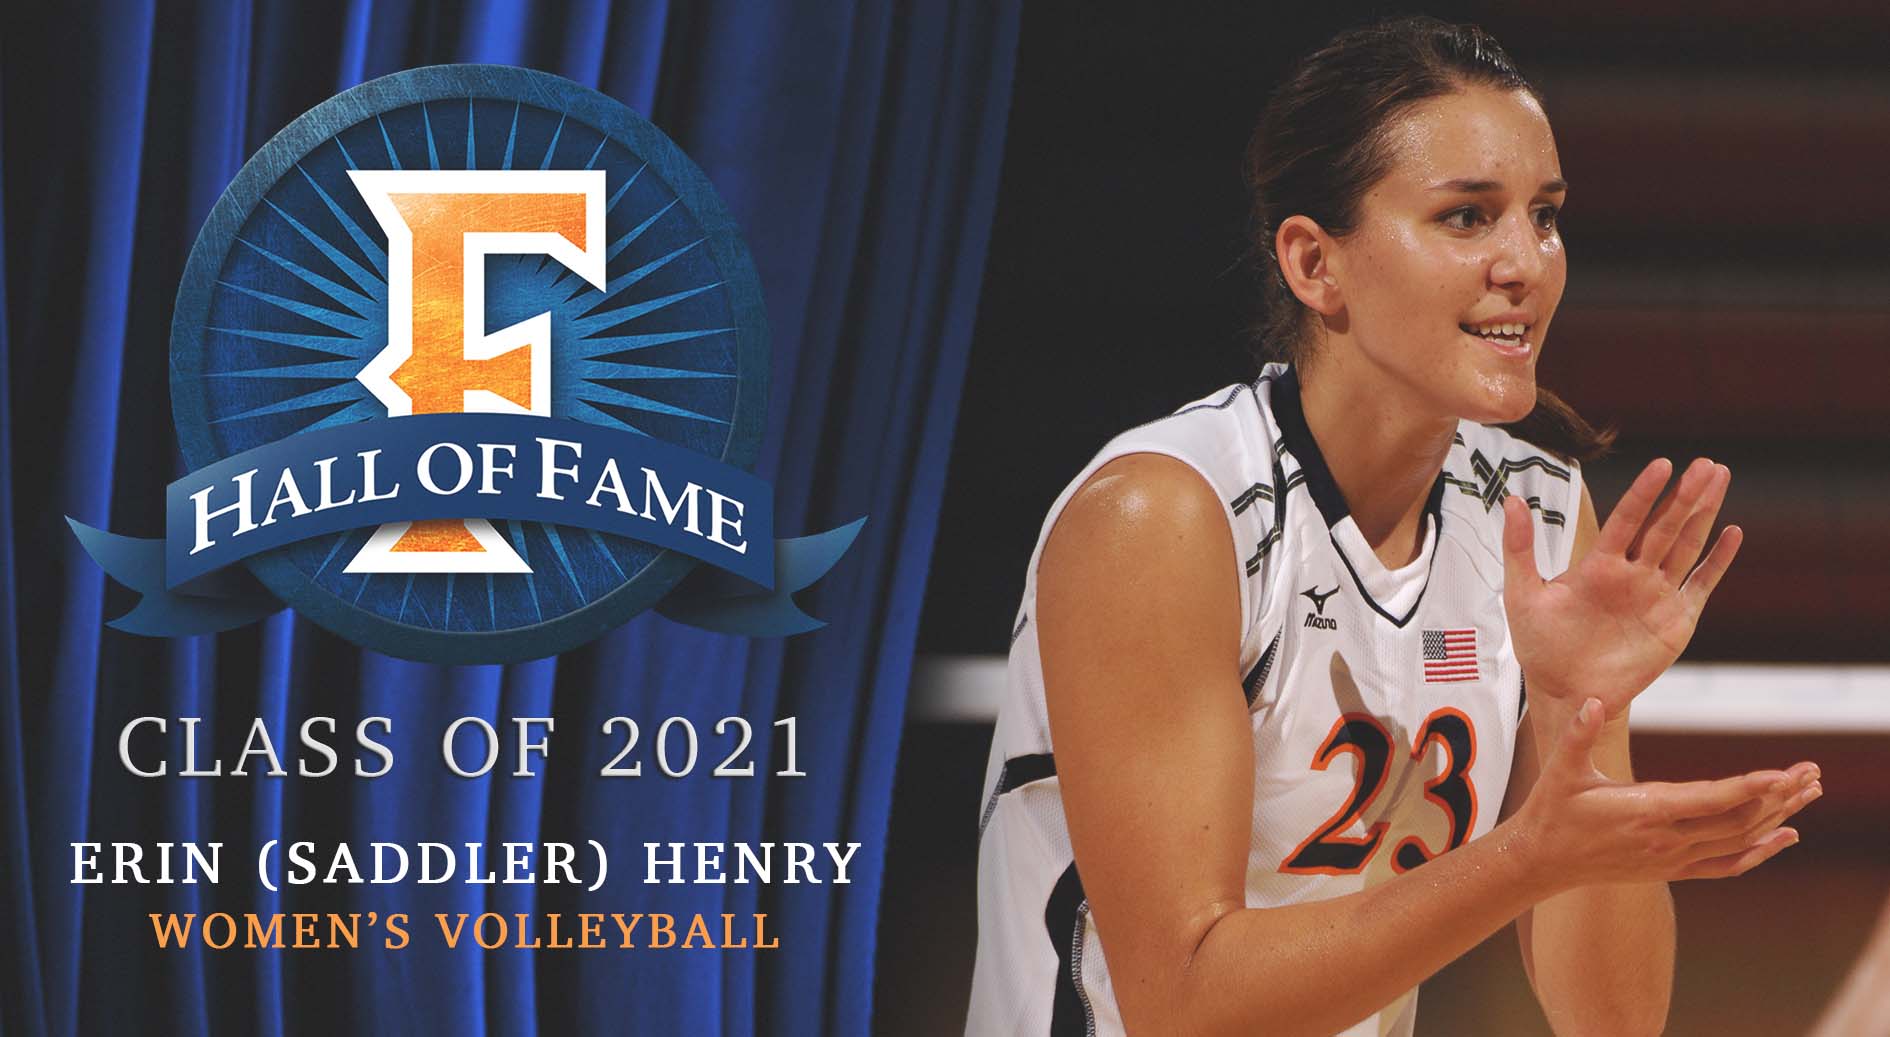 Erin (Saddler) Henry to be Inducted Into Athletics Hall of Fame